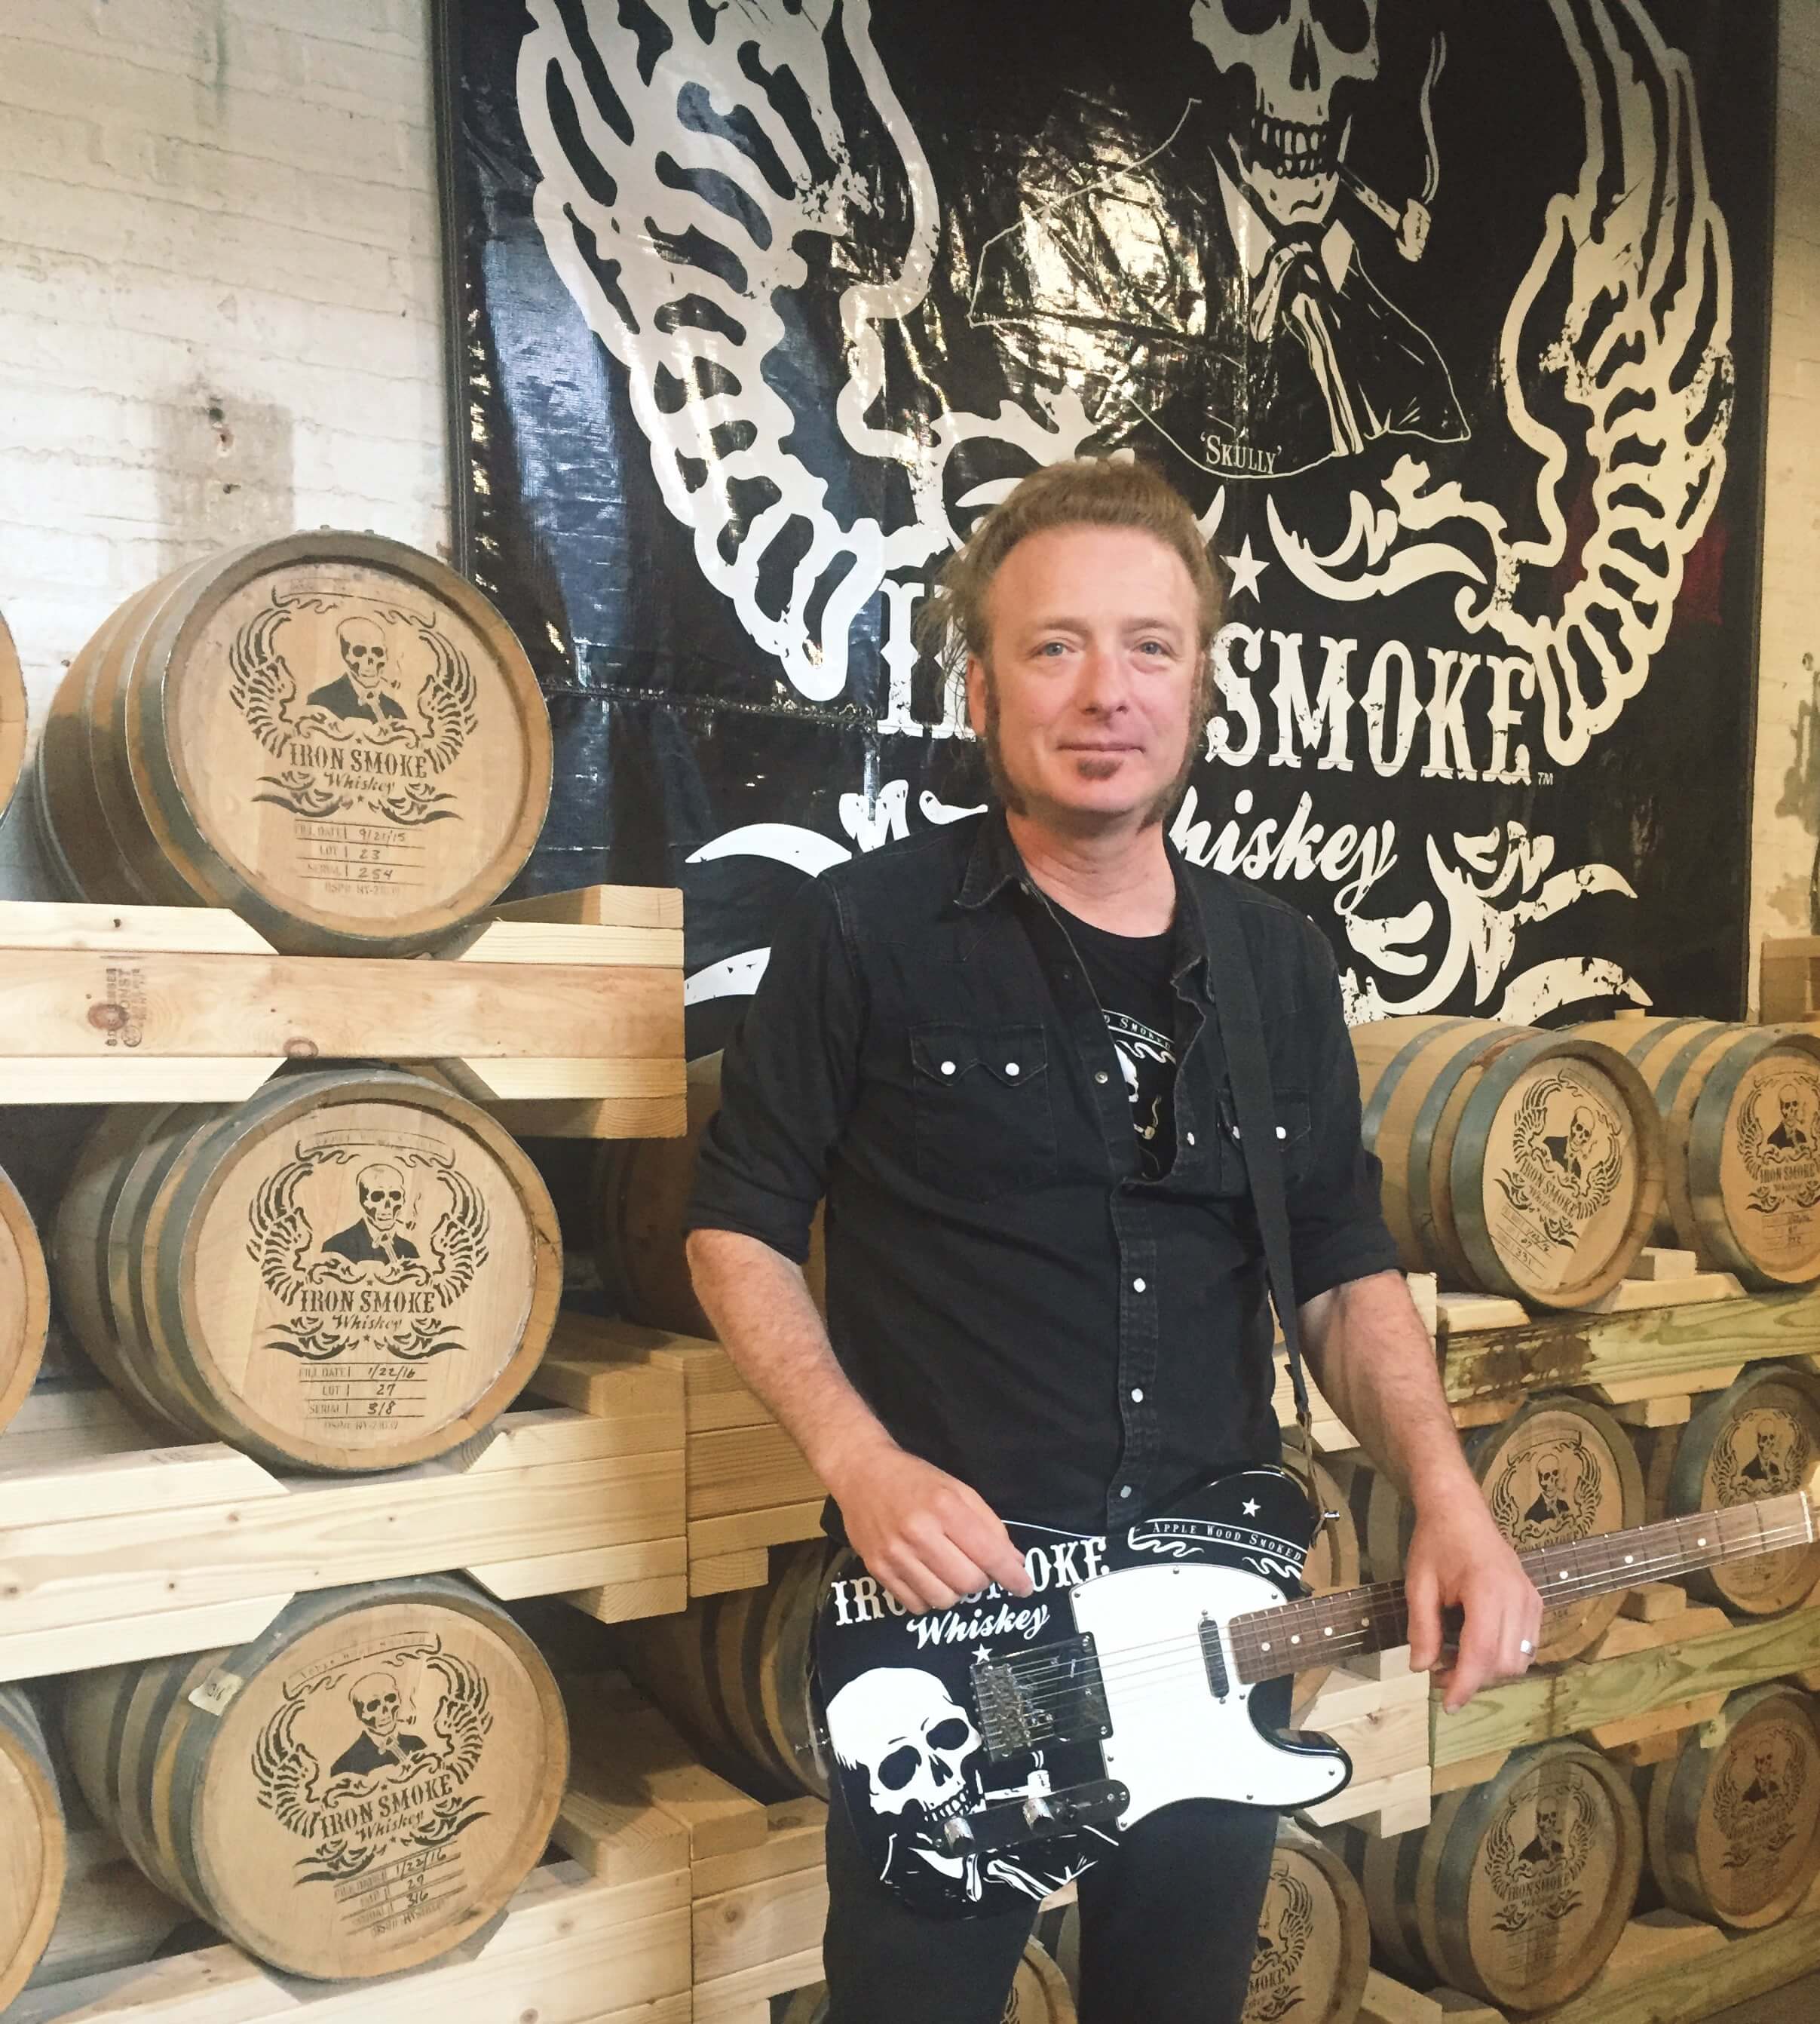 Iron Smoke Whiskey Founder Tommy Brunett is excited about creating jobs in Rochester and (of course) making whiskey.